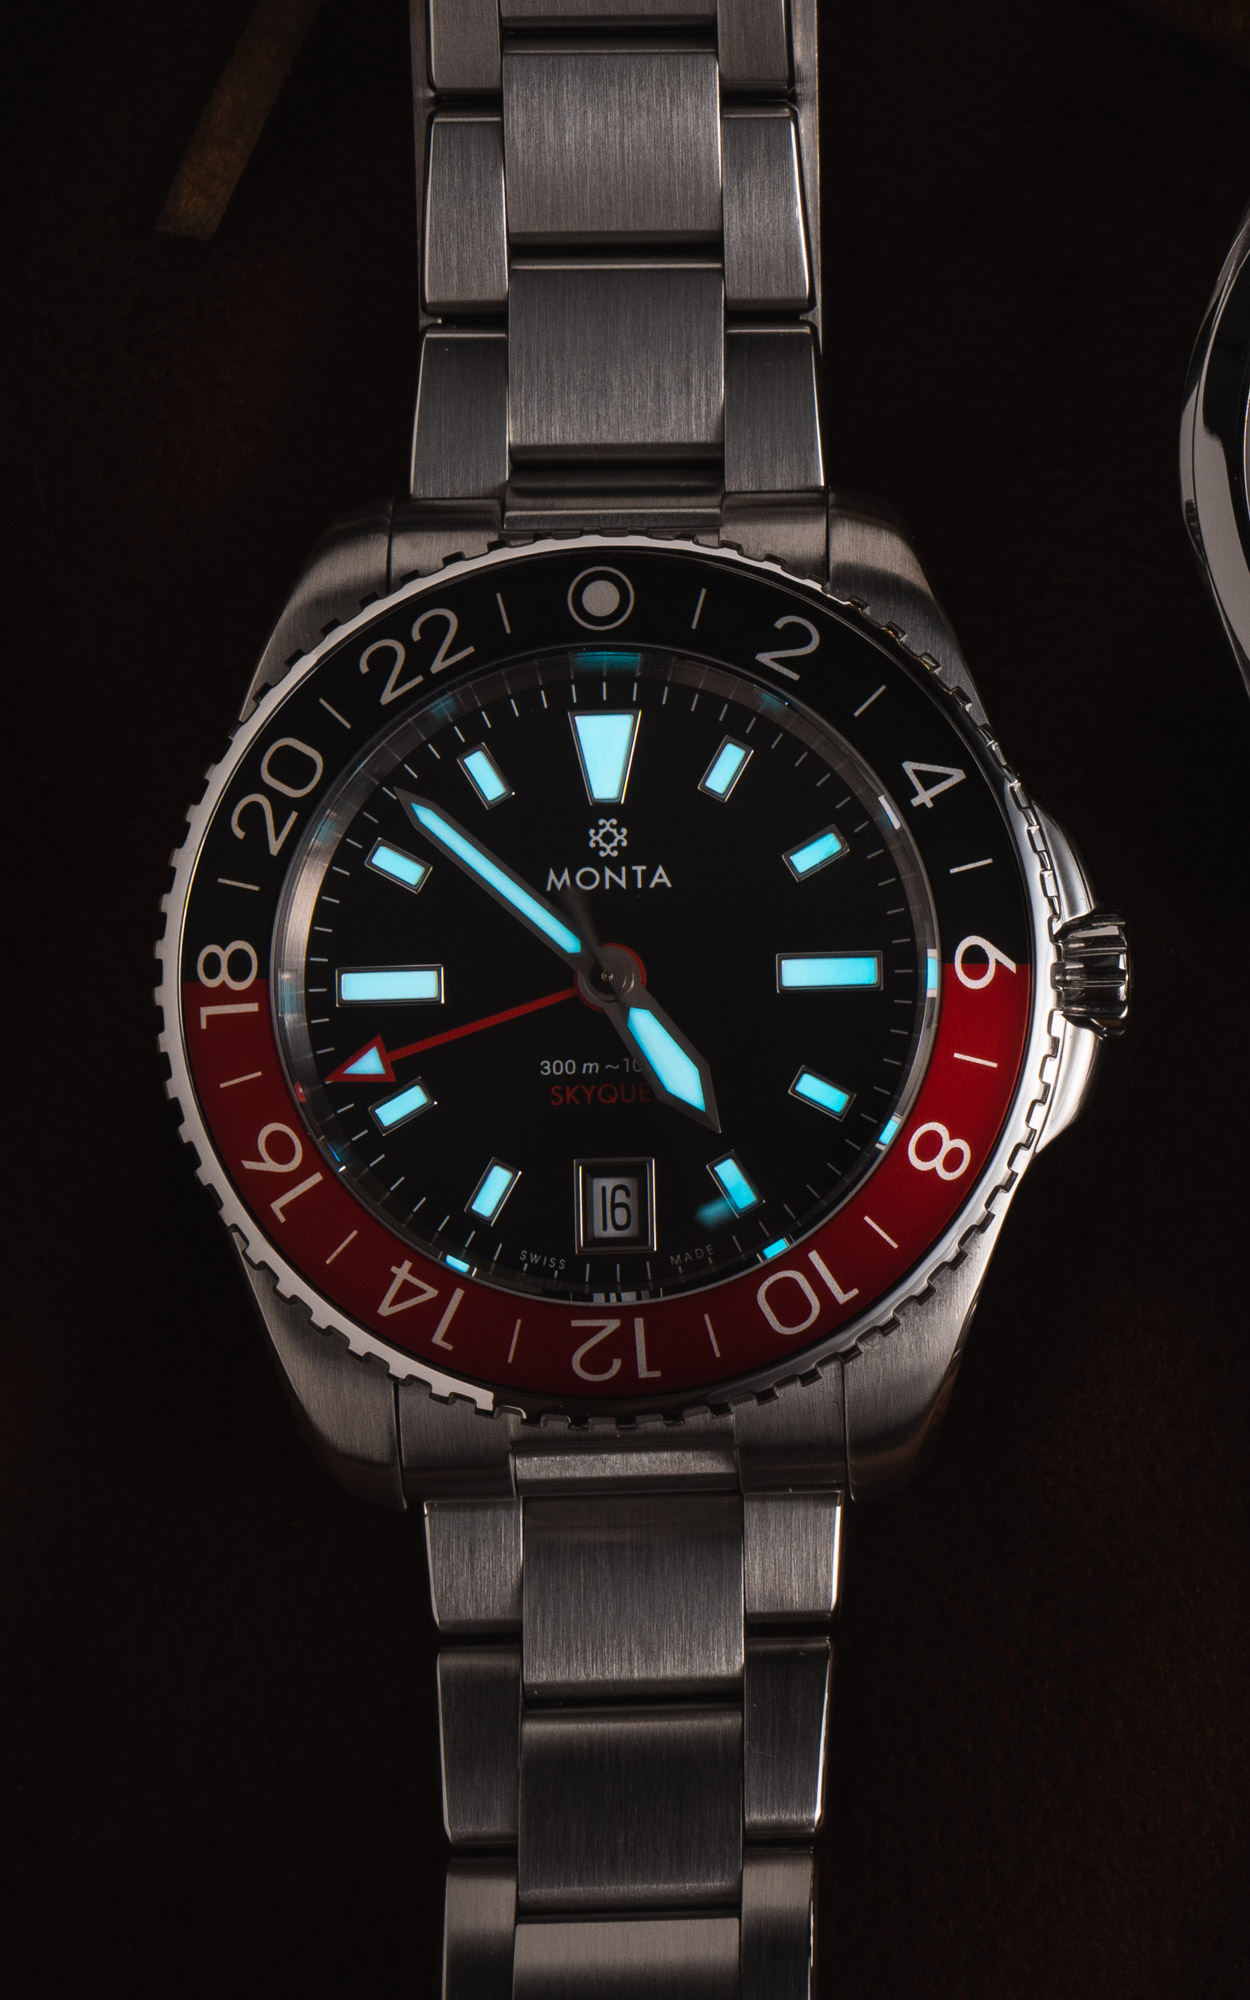 Skyquest GMT Watch Lume